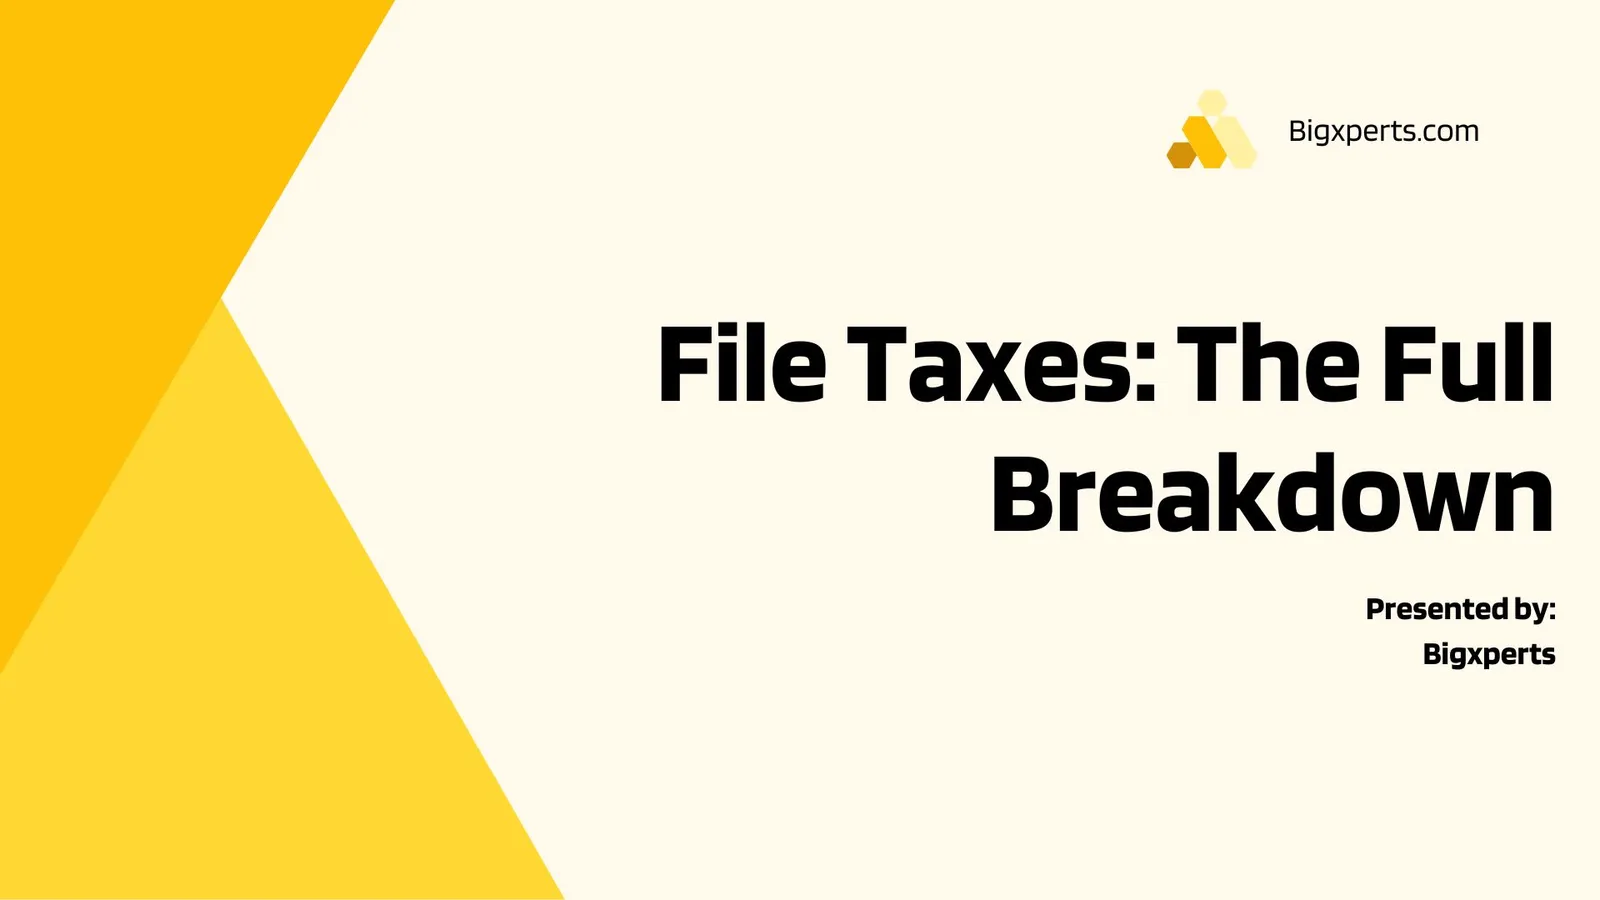 How to File Taxes: The Full Breakdown